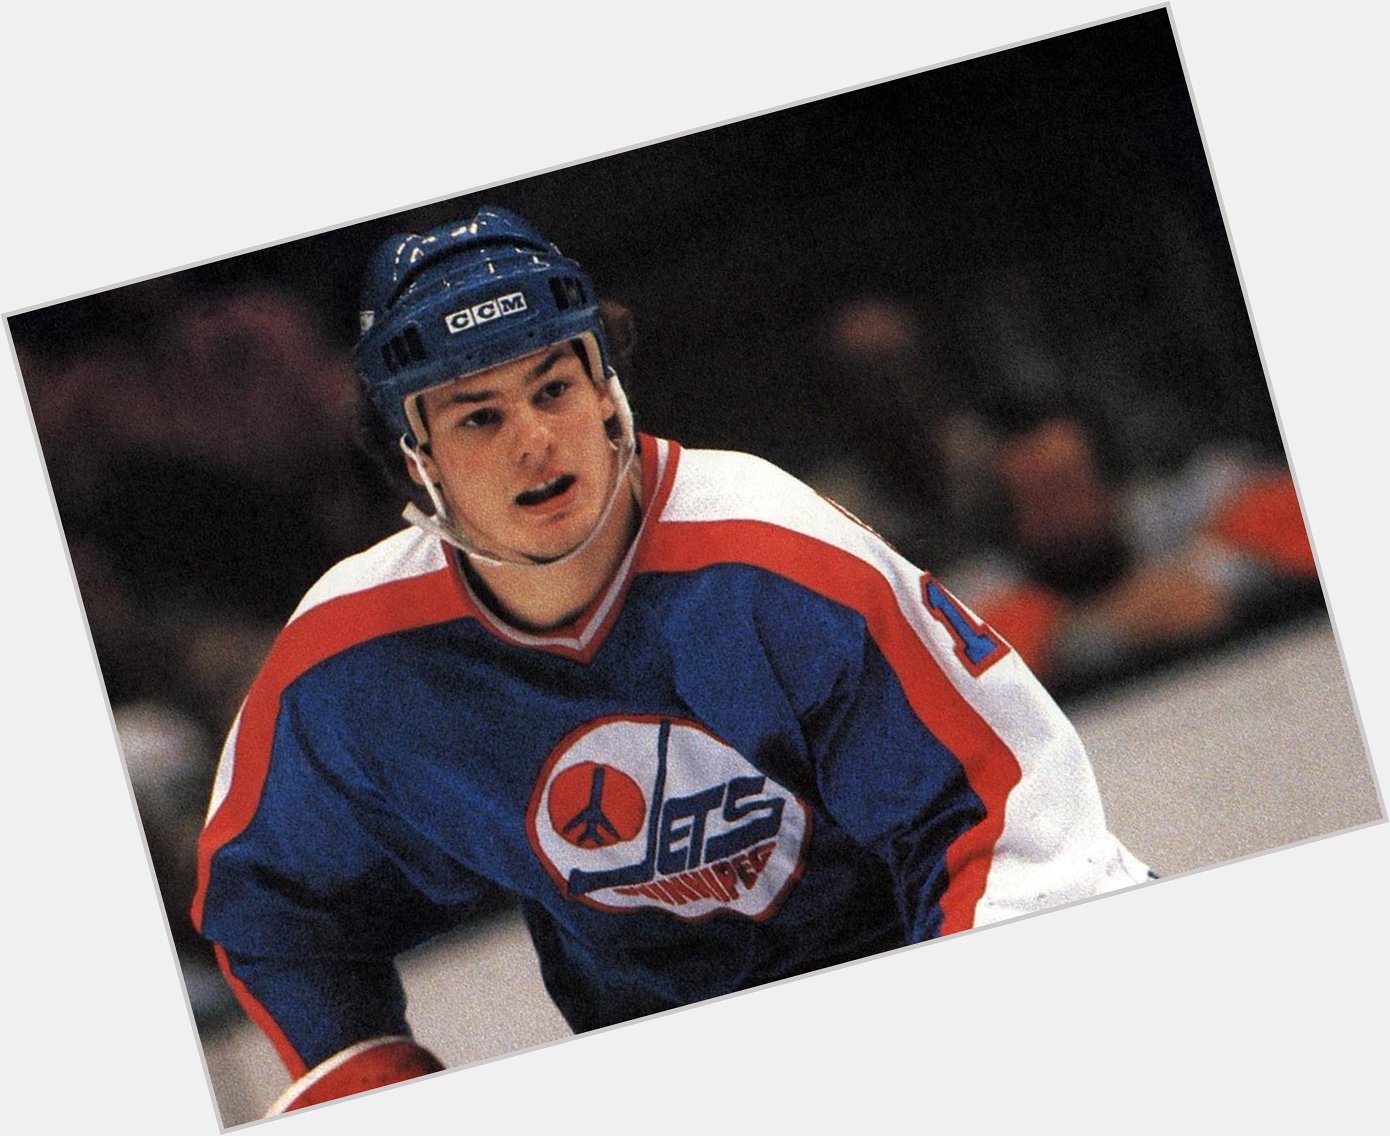 Happy birthday to Dale Hawerchuk born on this day in 1963.  